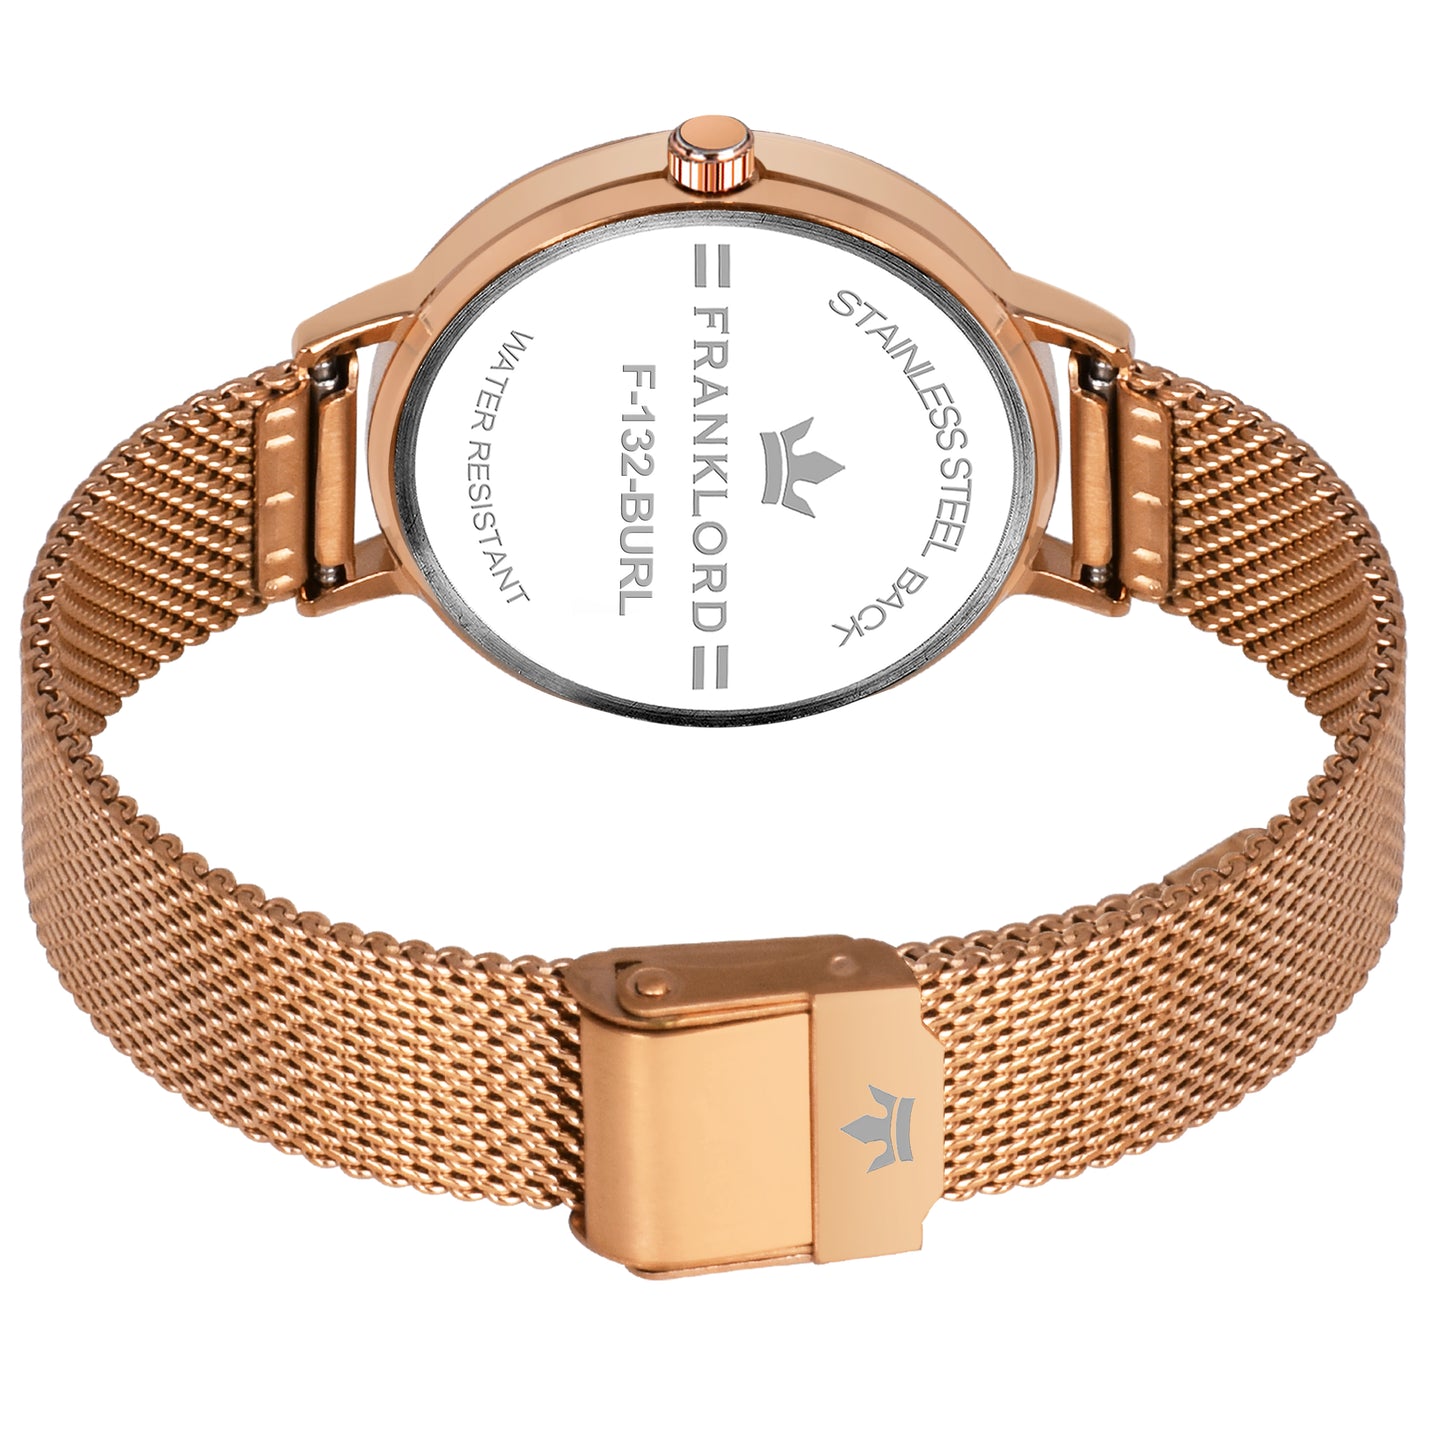 ROMEO & JUILET -Rose Gold -Passion's Promise Watch For Women F-132 BURL